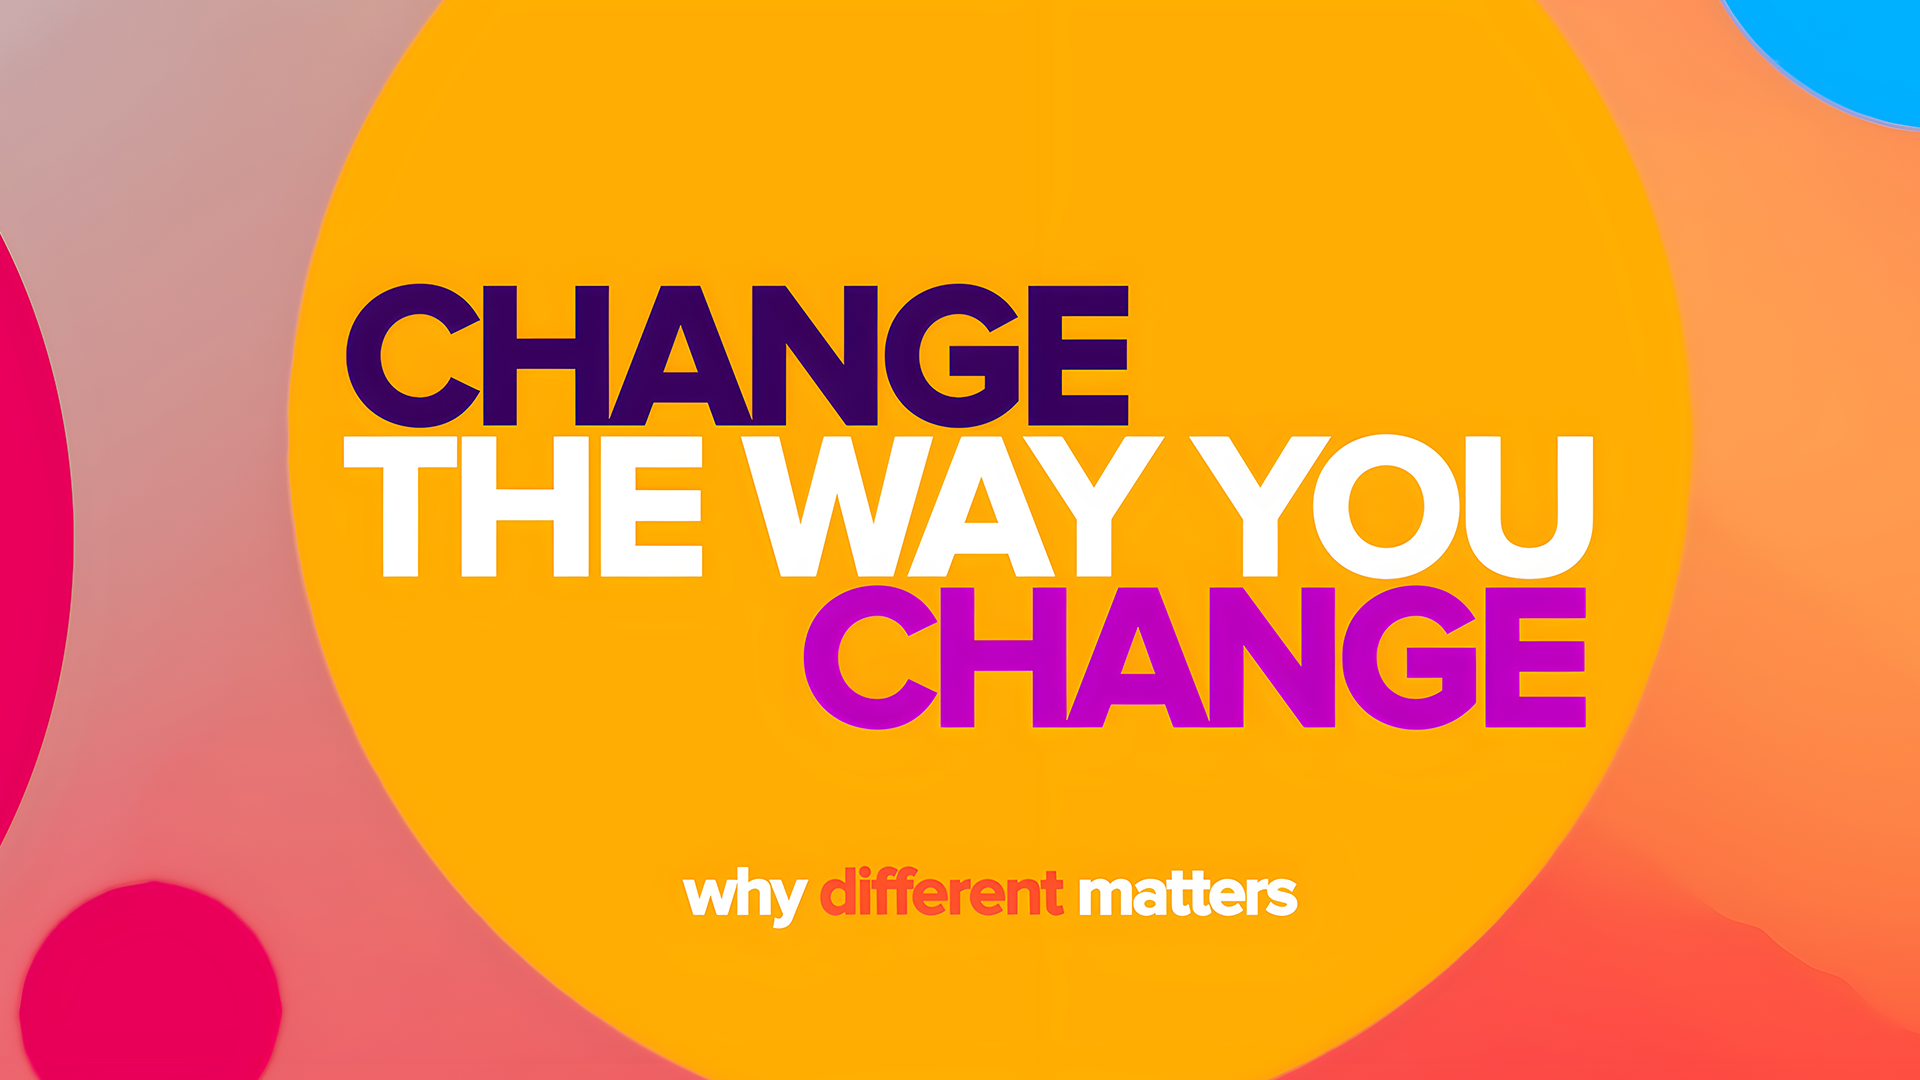 Change The Way You Change: Why Different Matters